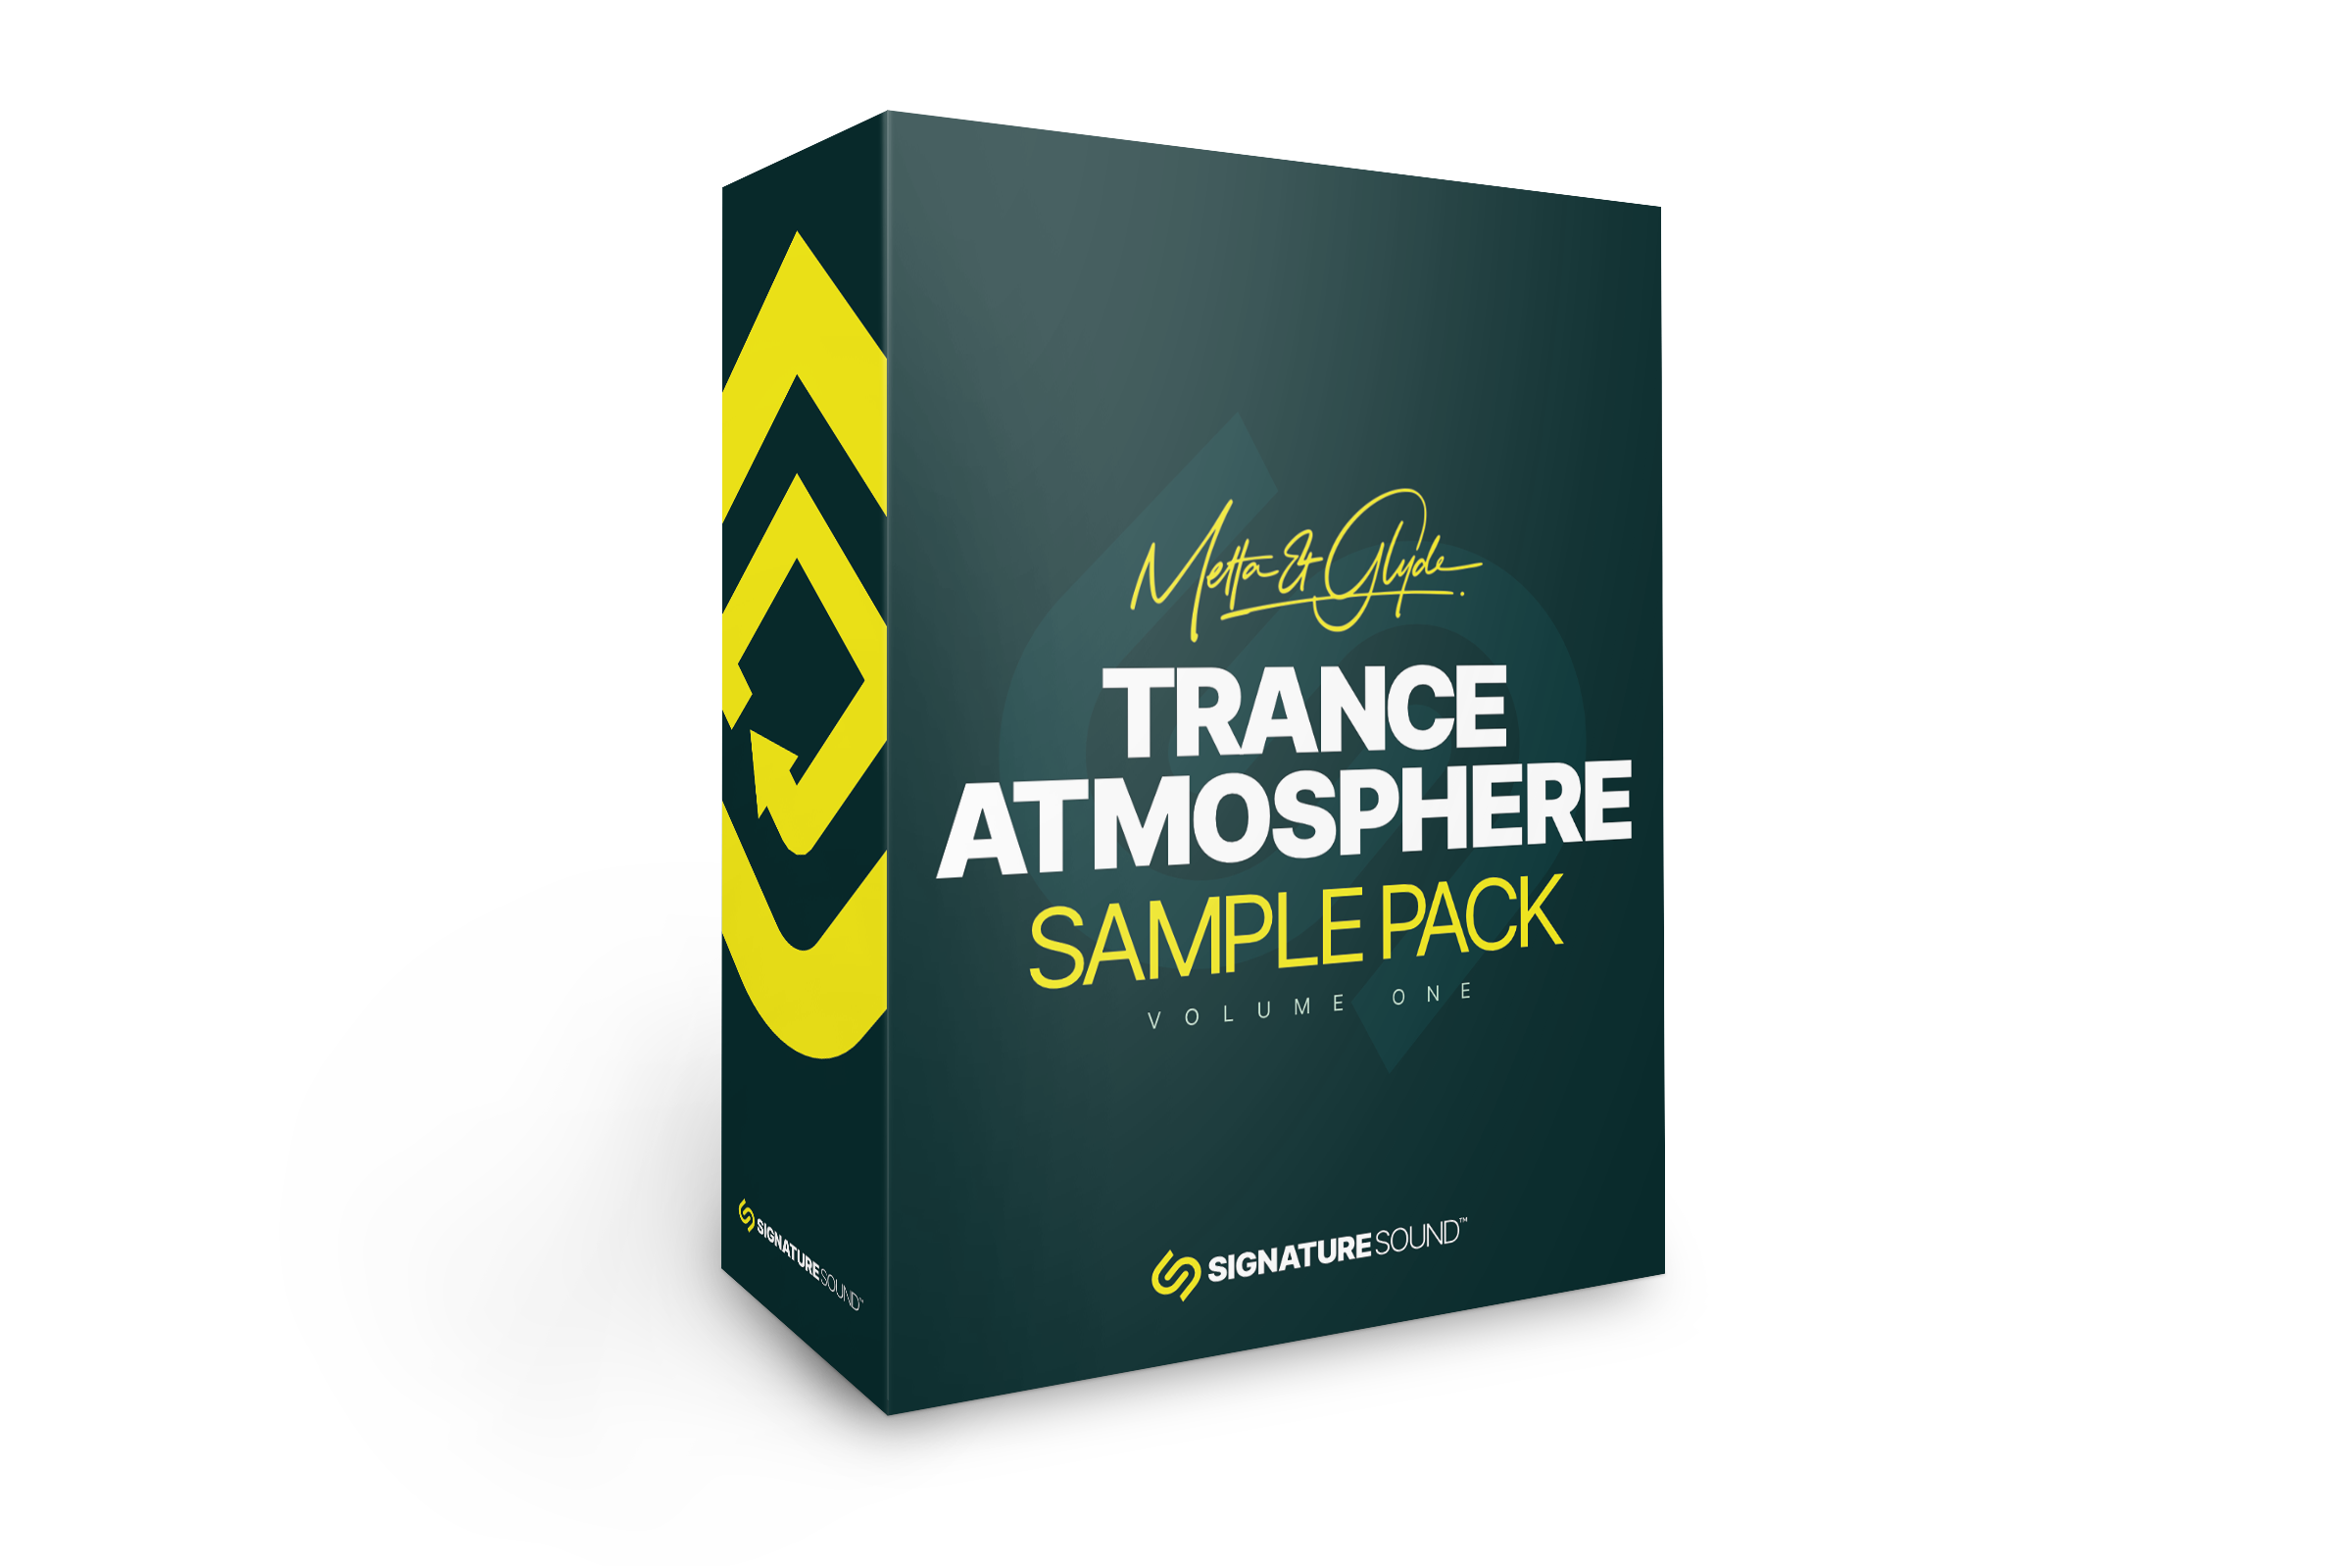 Metta and Glyde Trance Atmosphere [Sample Pack] Volume One